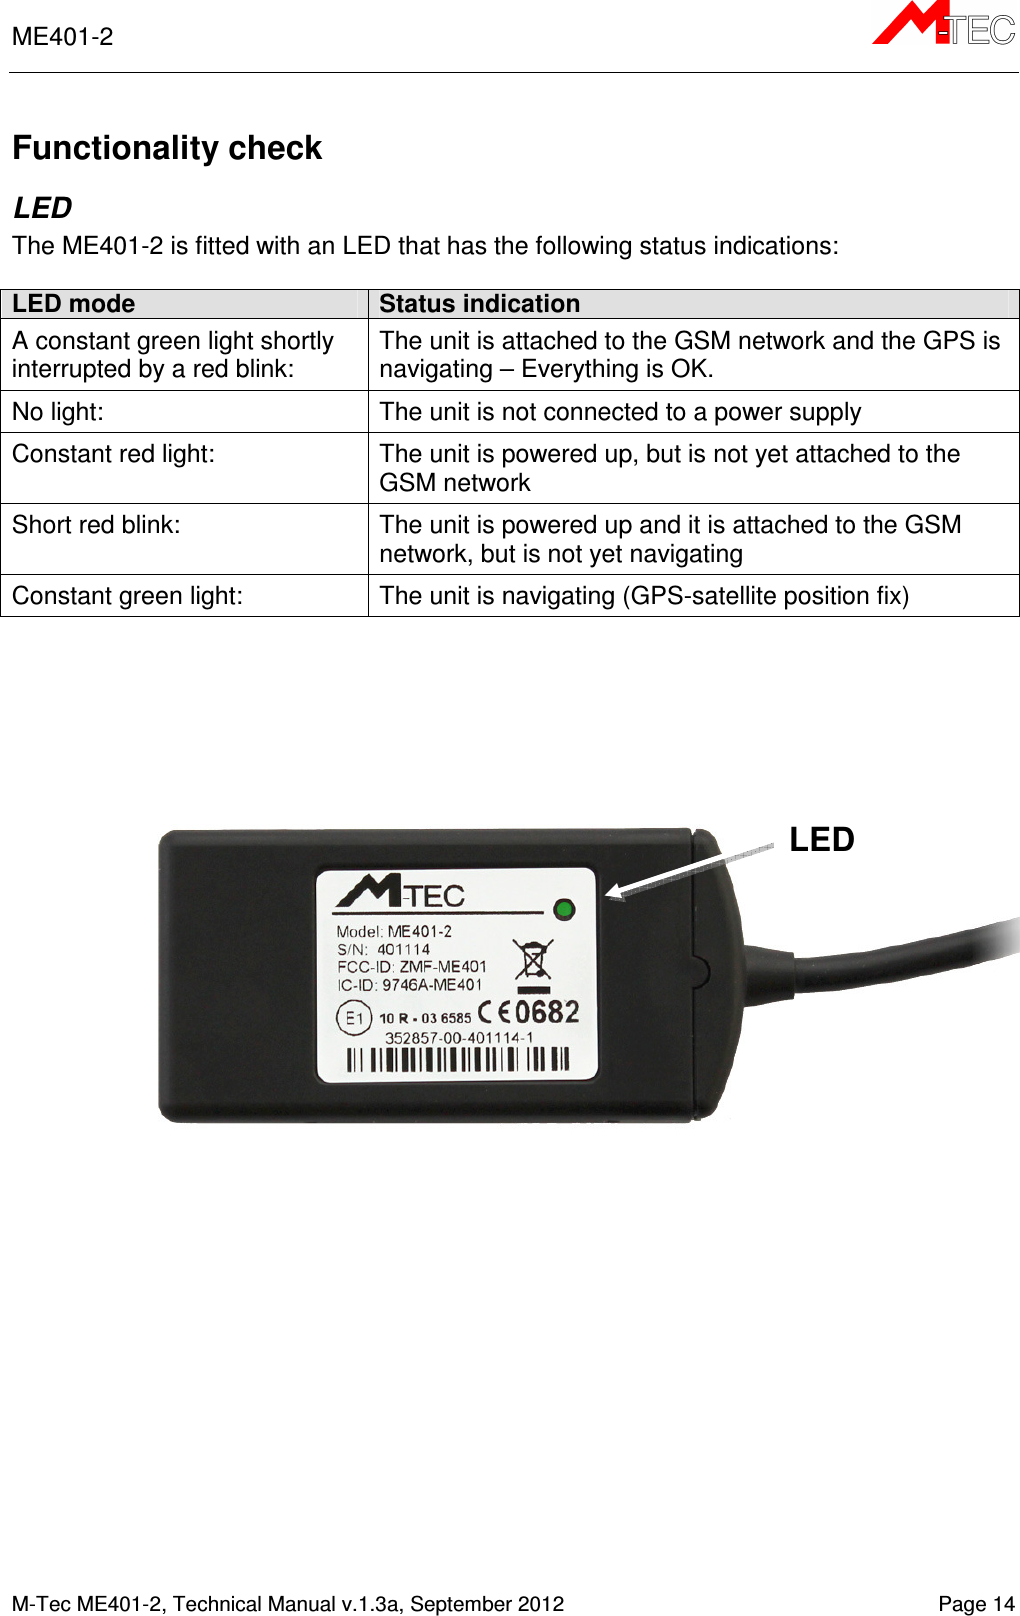 ME401-2       M-Tec ME401-2, Technical Manual v.1.3a, September 2012   Page 14 Functionality check LED The ME401-2 is fitted with an LED that has the following status indications:  LED mode Status indication A constant green light shortly interrupted by a red blink: The unit is attached to the GSM network and the GPS is navigating – Everything is OK. No light:  The unit is not connected to a power supply Constant red light:  The unit is powered up, but is not yet attached to the GSM network Short red blink:  The unit is powered up and it is attached to the GSM network, but is not yet navigating Constant green light:  The unit is navigating (GPS-satellite position fix)     LED 